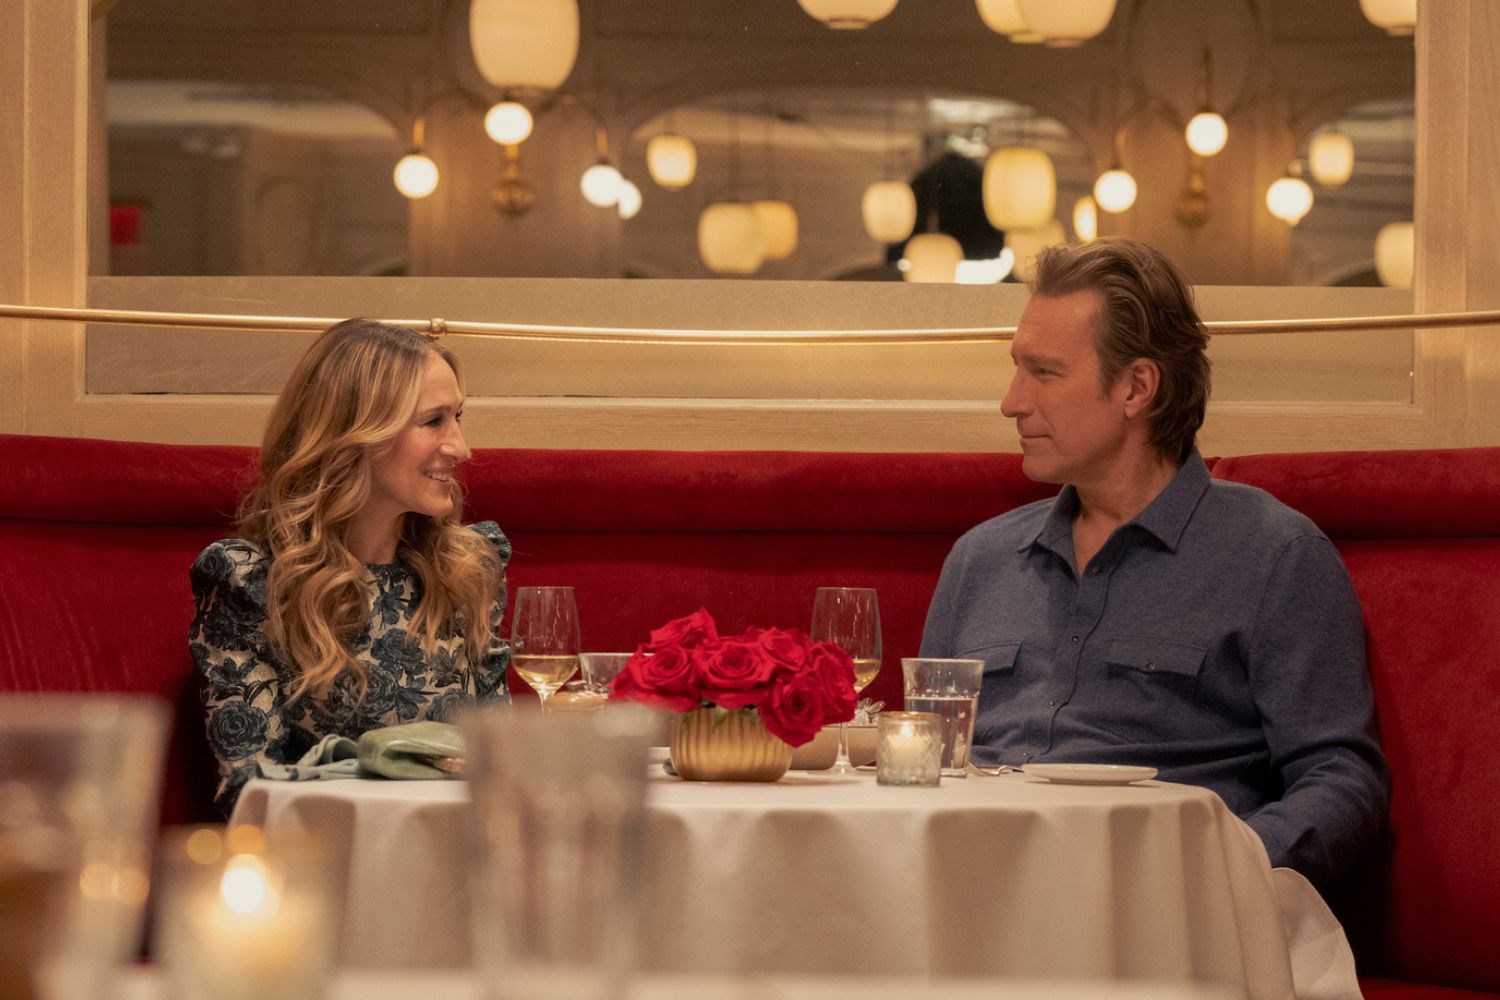 and-just-like-that-season-2-episode-7-carrie-aidan-dinner